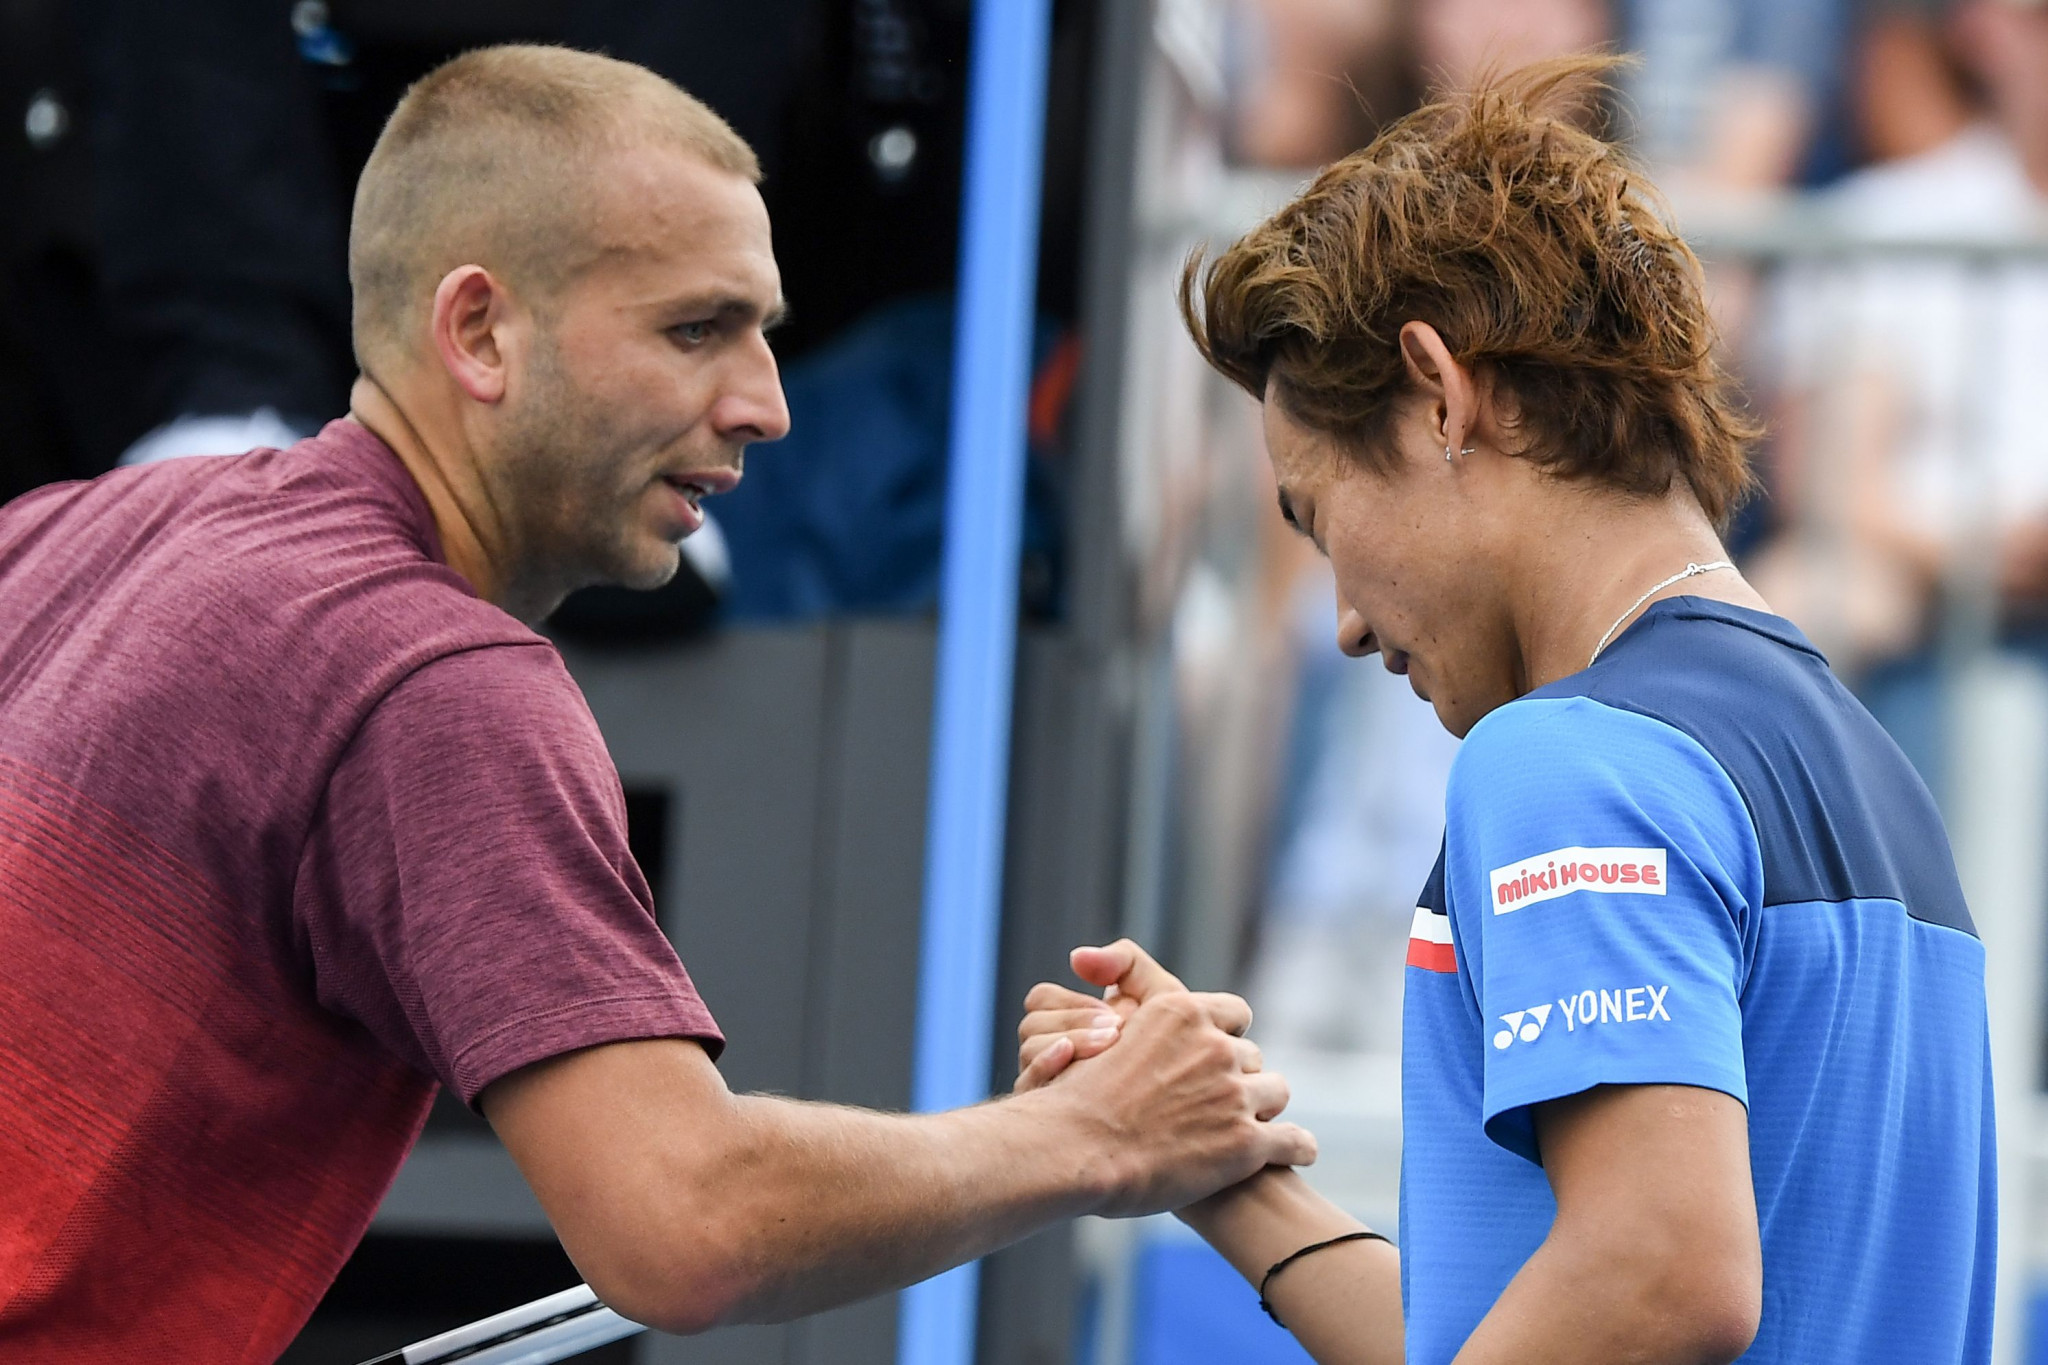 Britain's Dan Evans, left, revealed he miss may Tokyo 2020 after being beaten by Japan's Yoshihito Nishioka in the second round of the Australian Open ©Getty Images